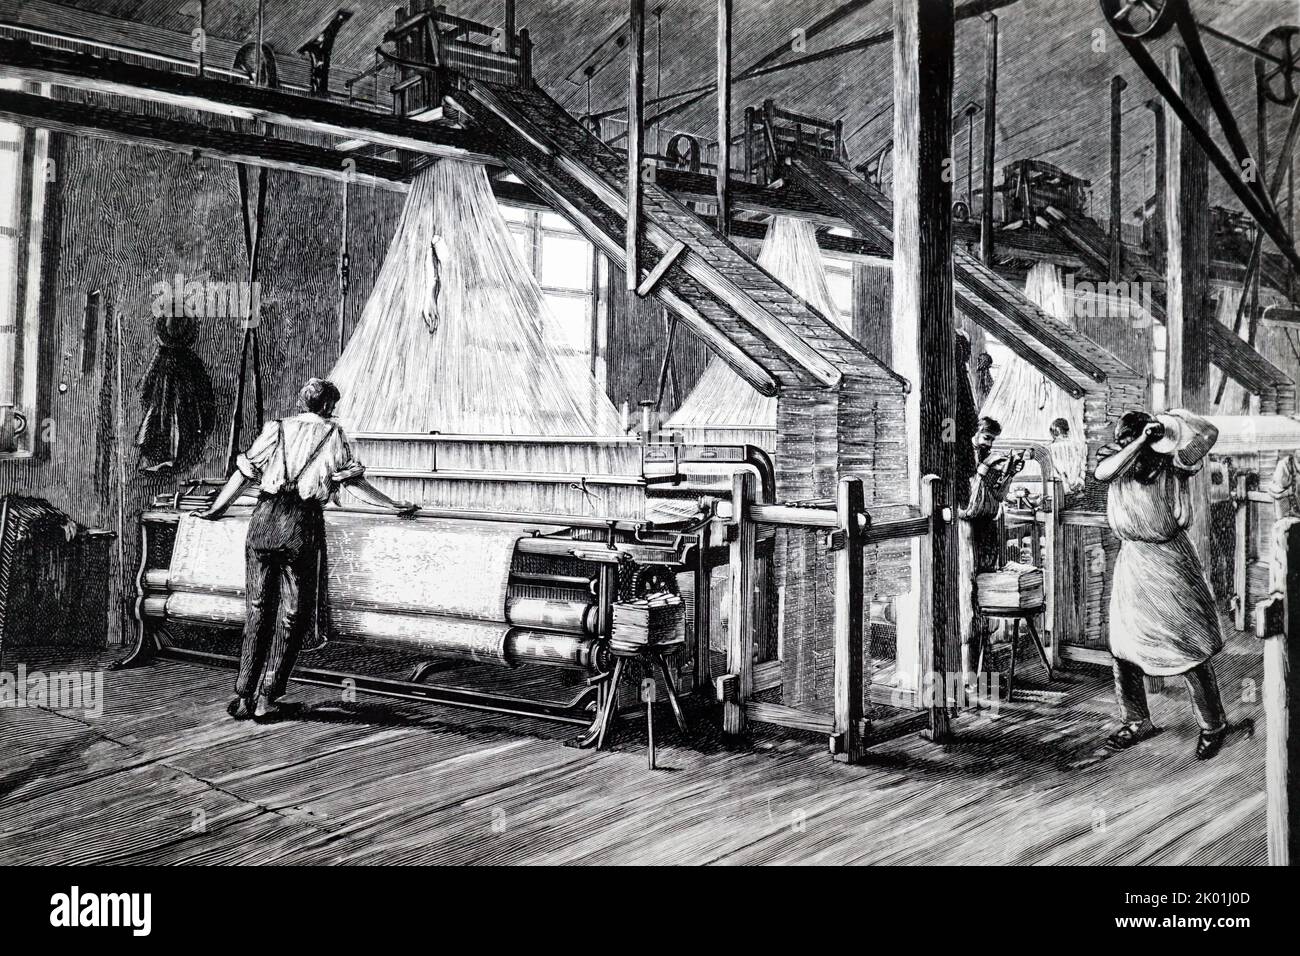 Weaving shed fitted with Jacquard looms, showing the loops of punched cards which carried the pattern. From Le Journal de la Jeunesse, Paris, 1891. Stock Photo